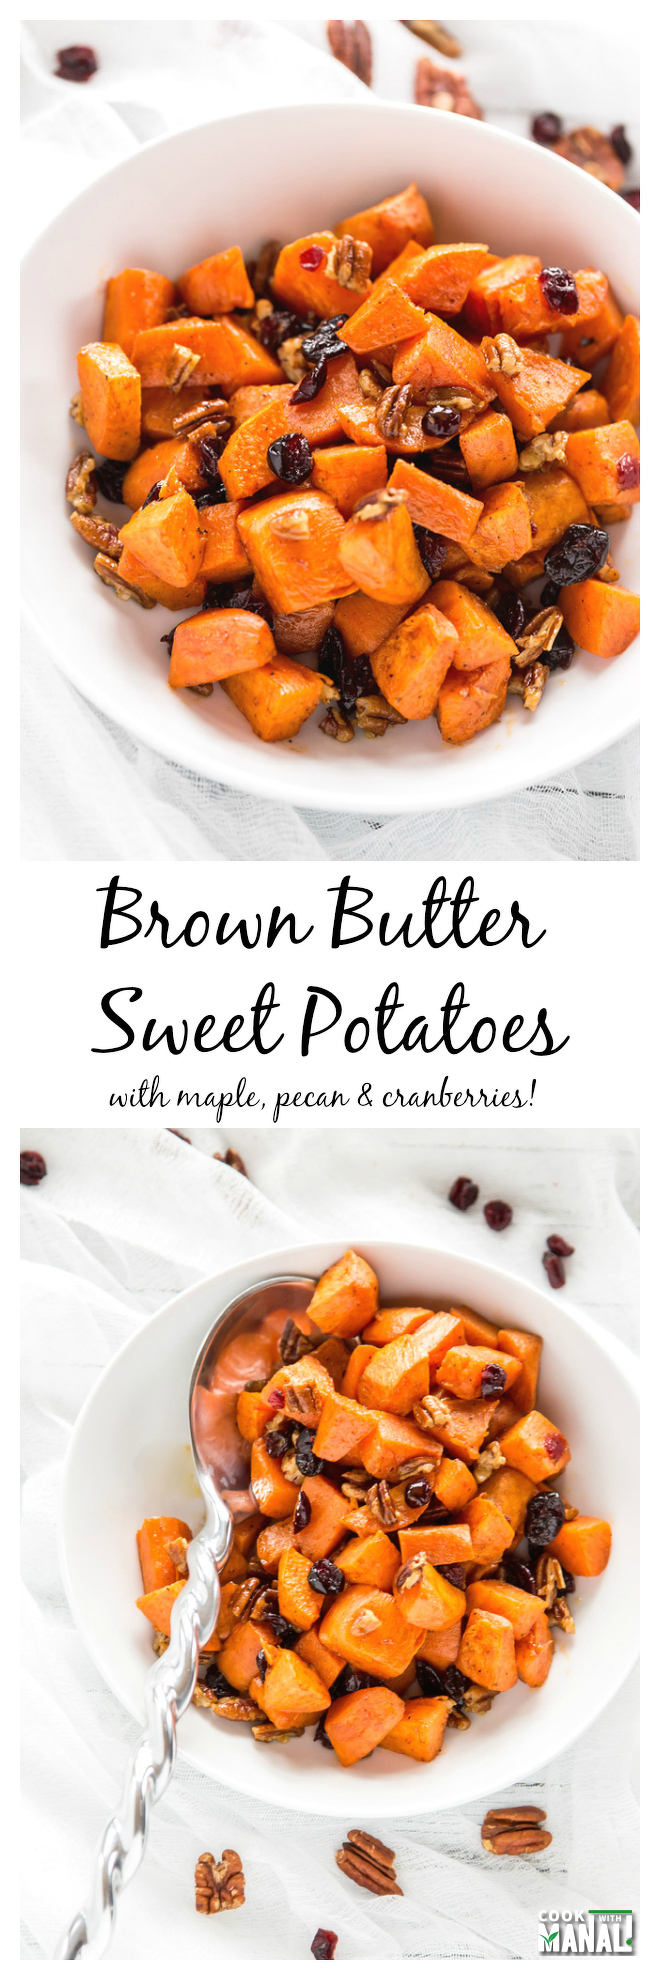 Brown Butter Sweet Potatoes with Maple Pecan & Cranberries Collage